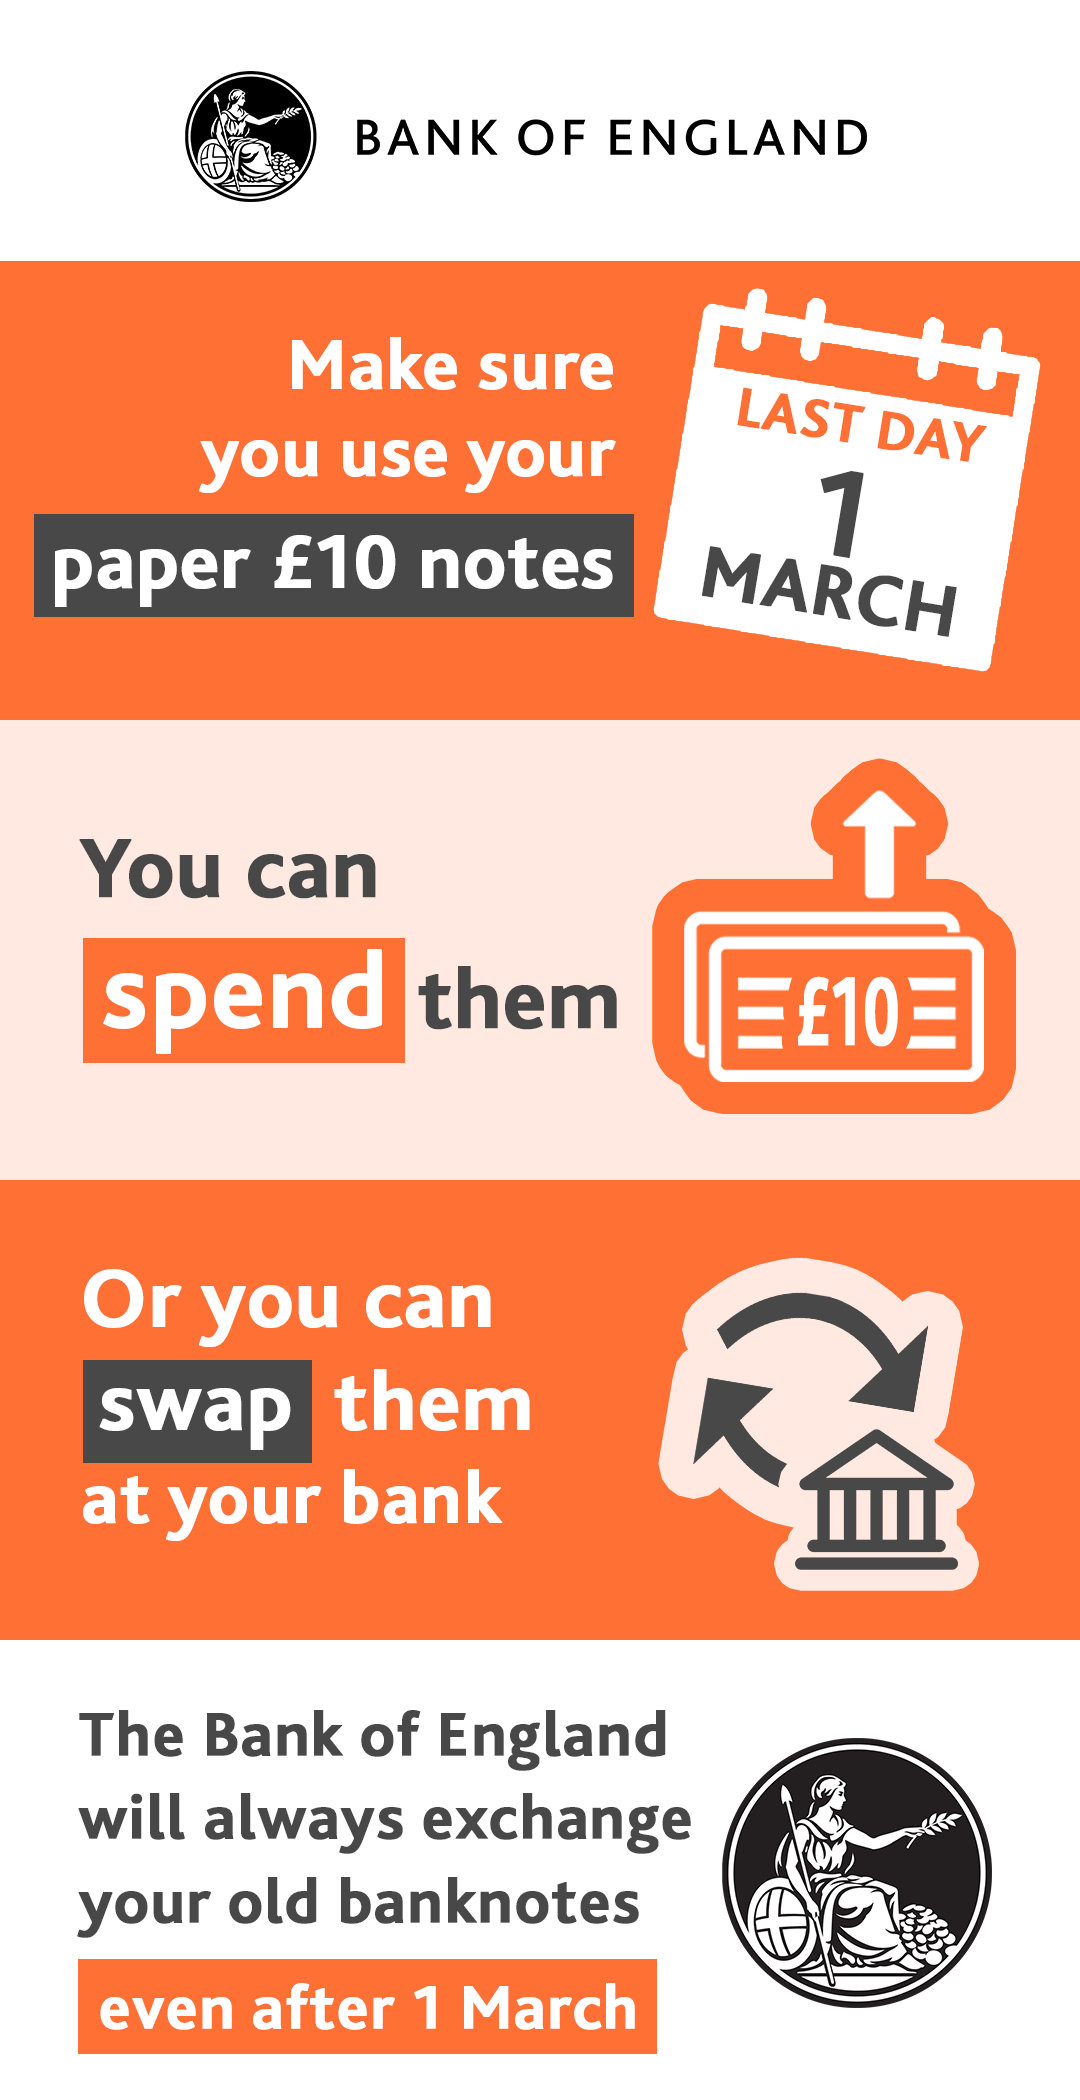 Make sure you use your paper £10 notes by 1 March 2018